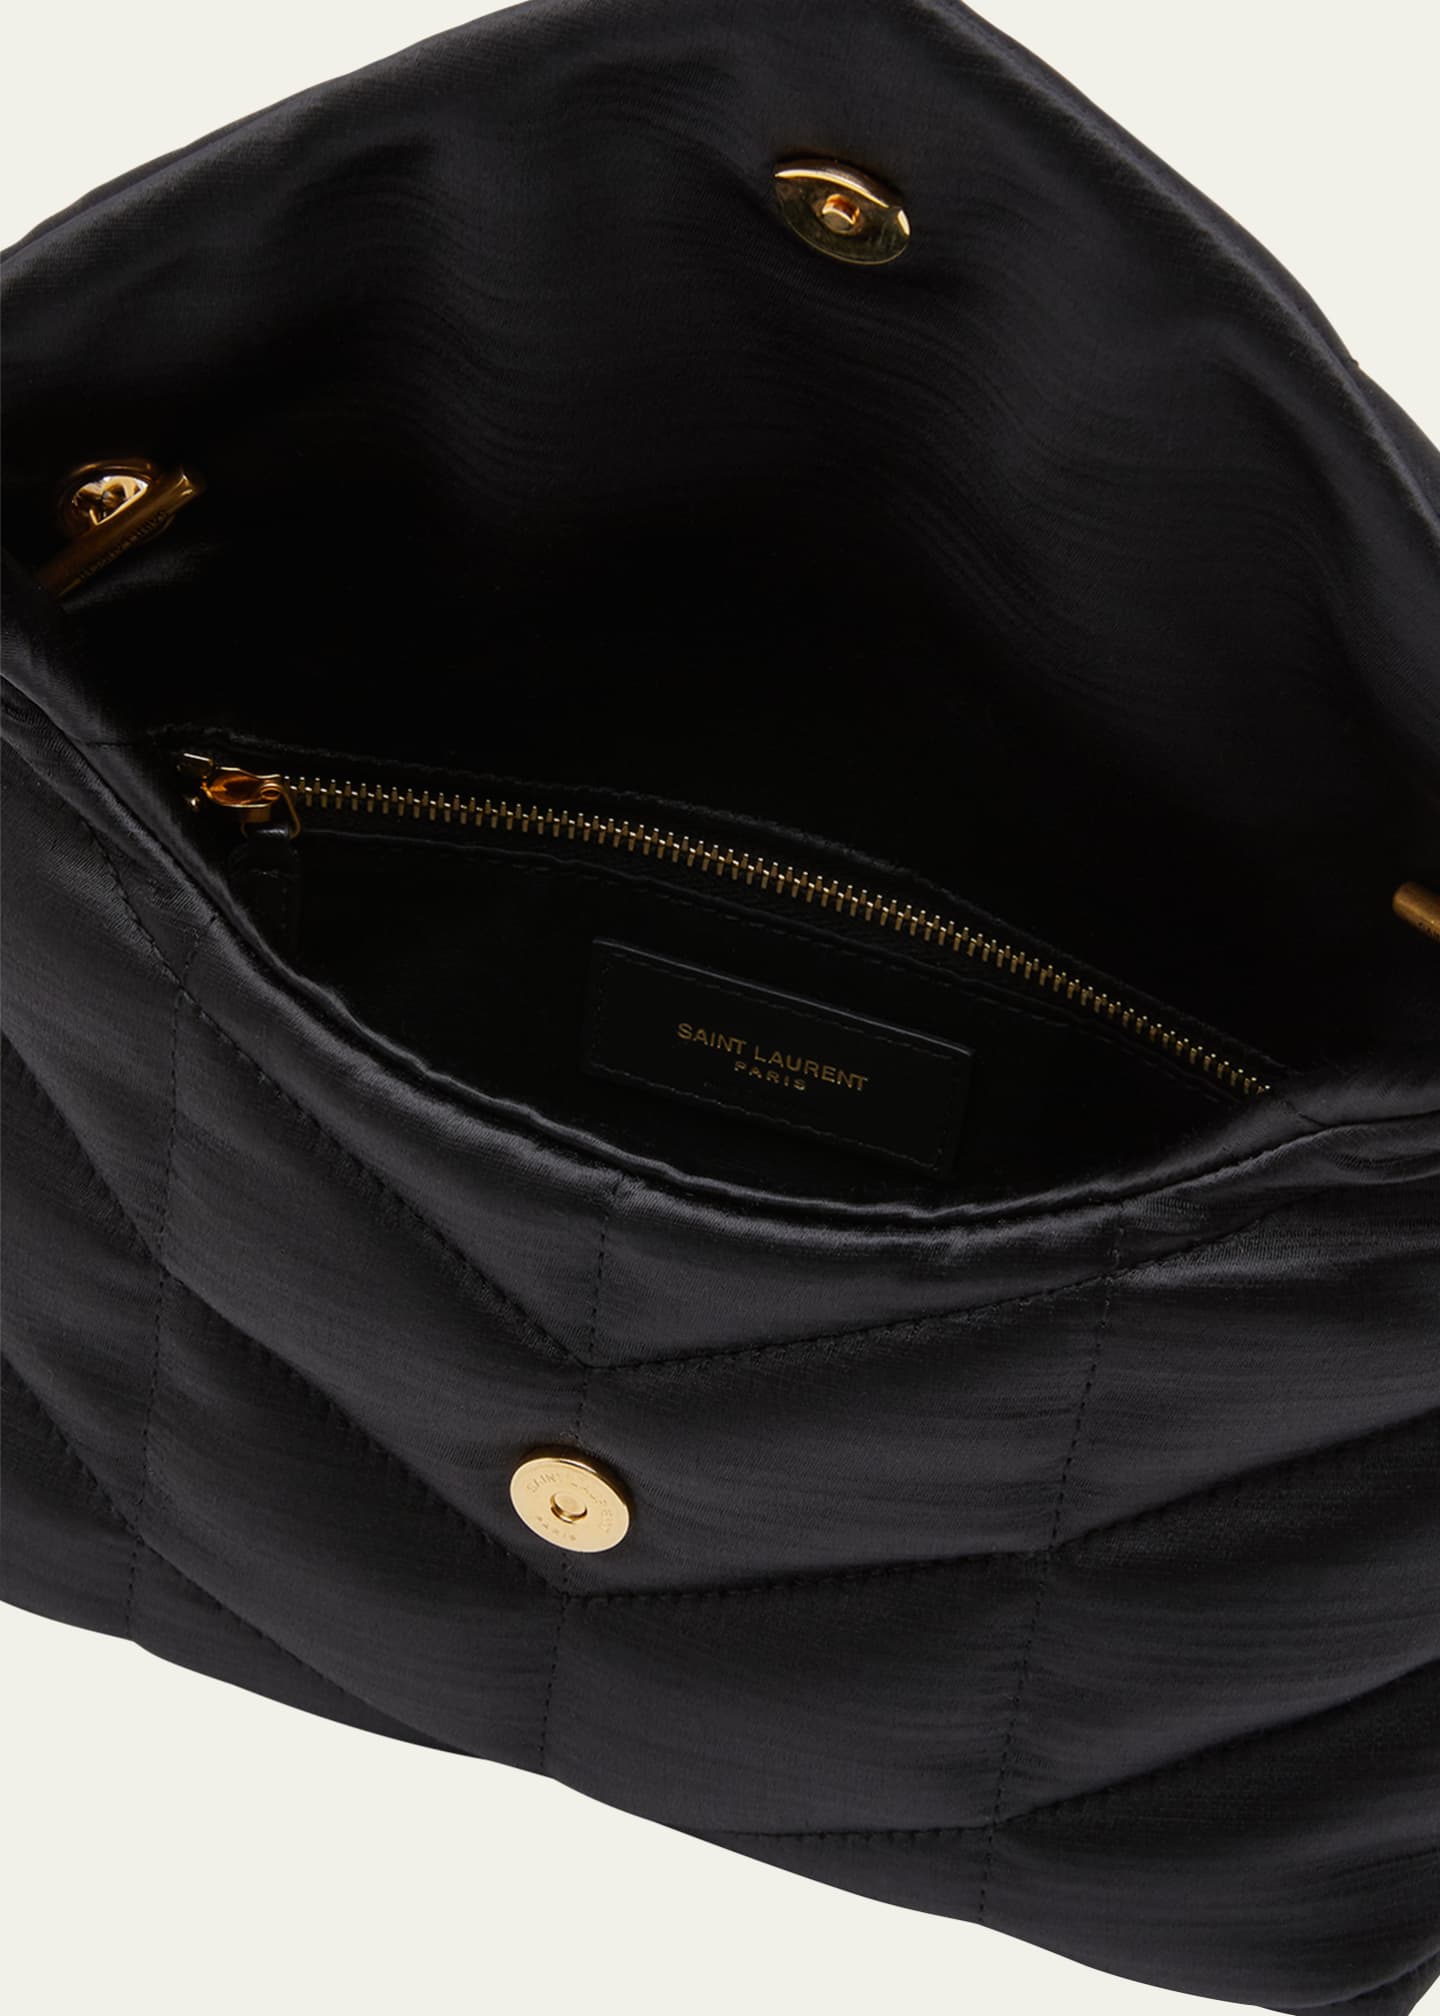 Saint Laurent Quilted Puffer Tote Bag in Black